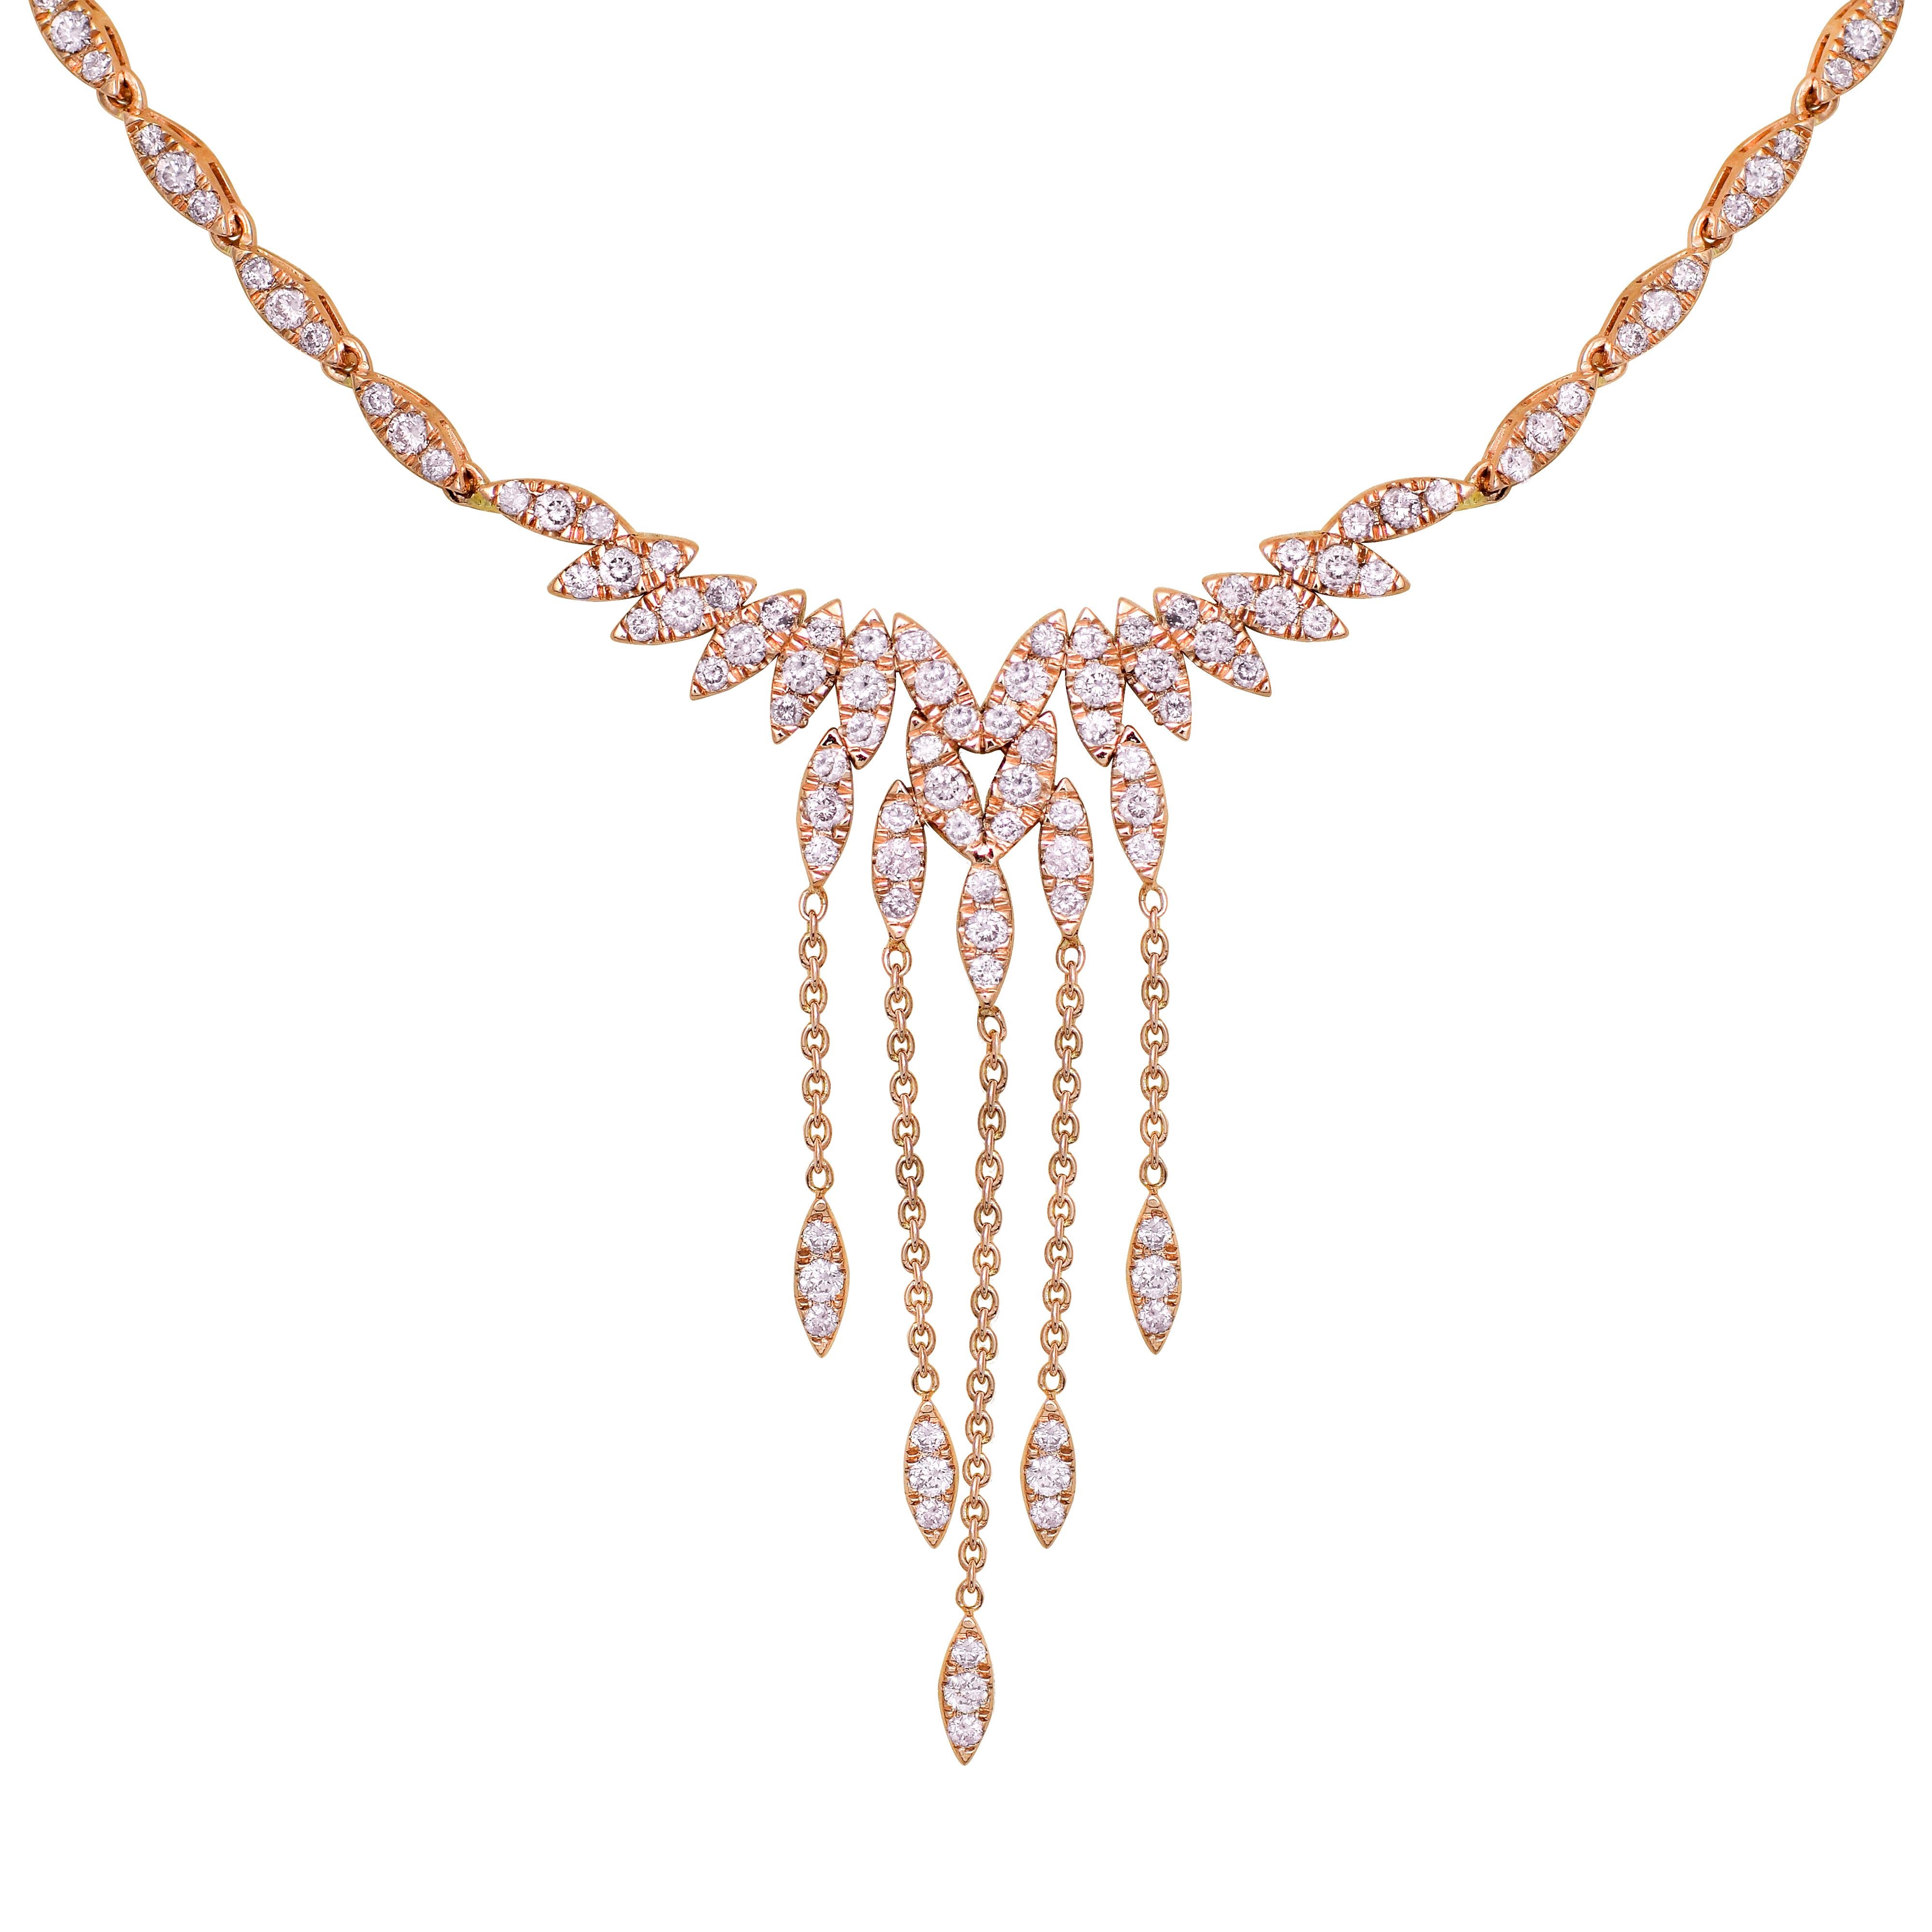 *IGI 14K 1.81 ct Natural Pink Diamonds  Art Deco Design Necklace*

This band features a stunning art deco design crafted from 14K rose gold. It is set with natural pink diamonds weighing 1.81 carats.

This necklace features colorful natural diamonds